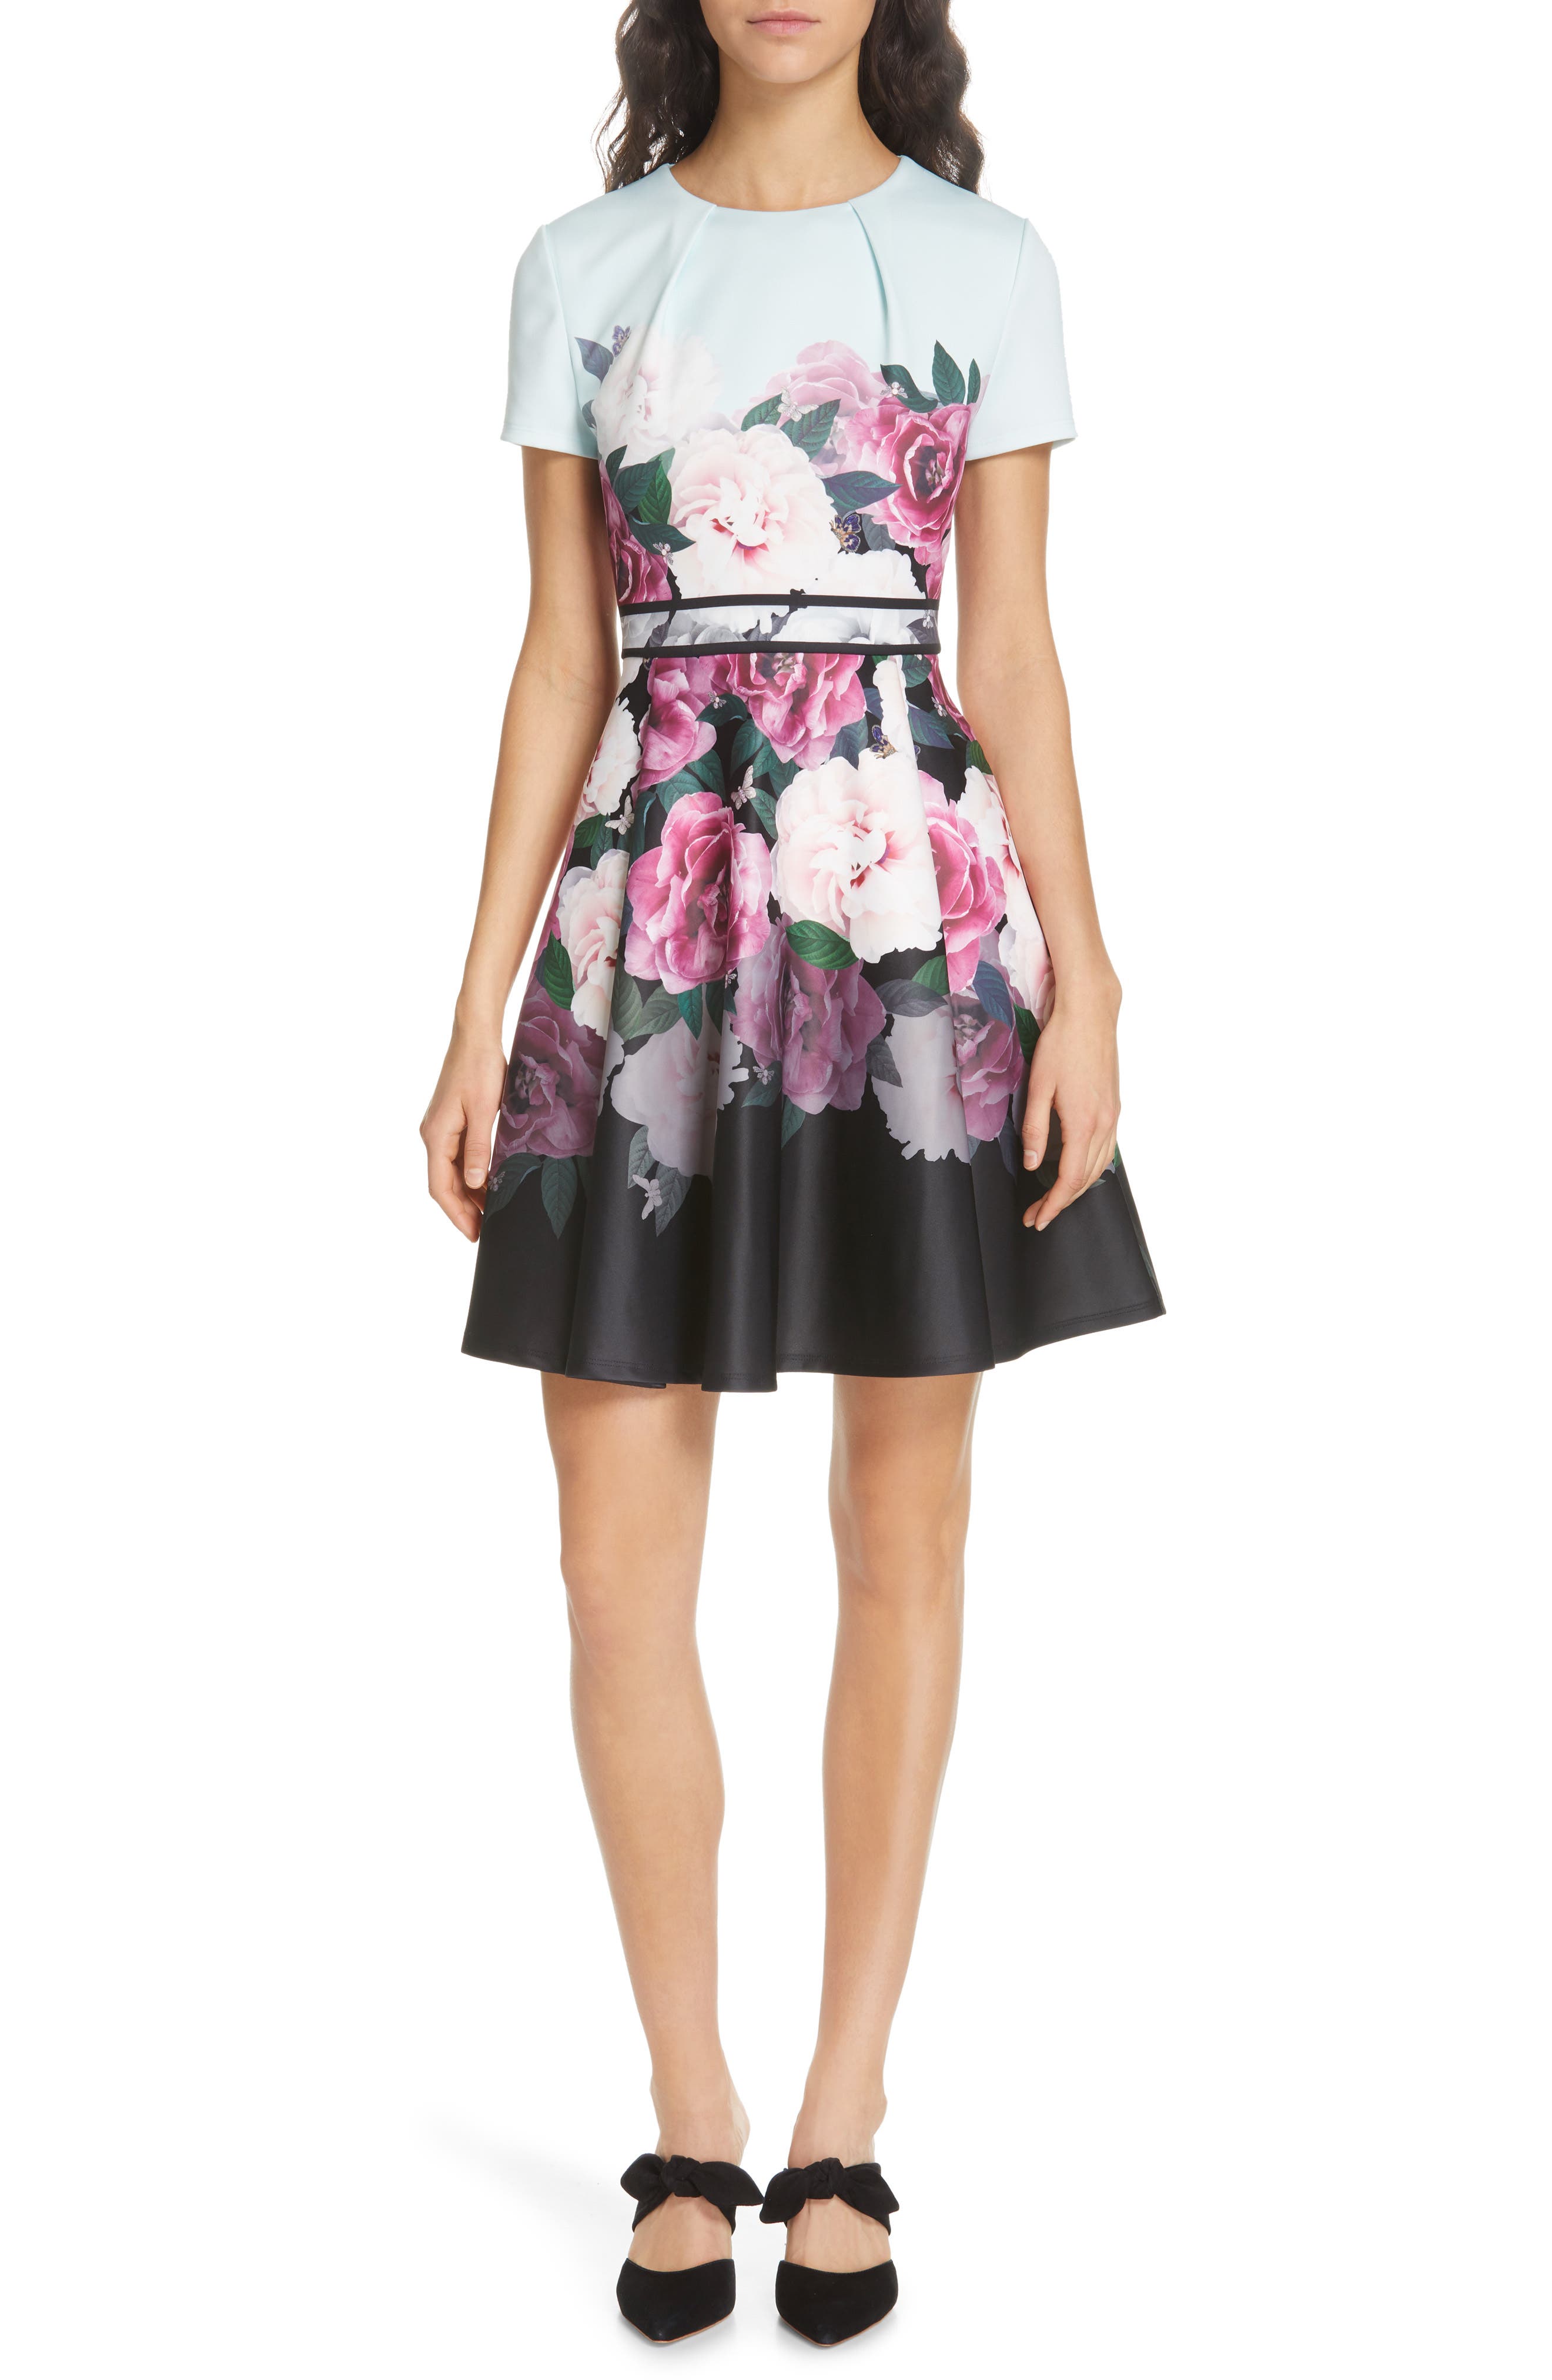 dolce and gabbana floral dress